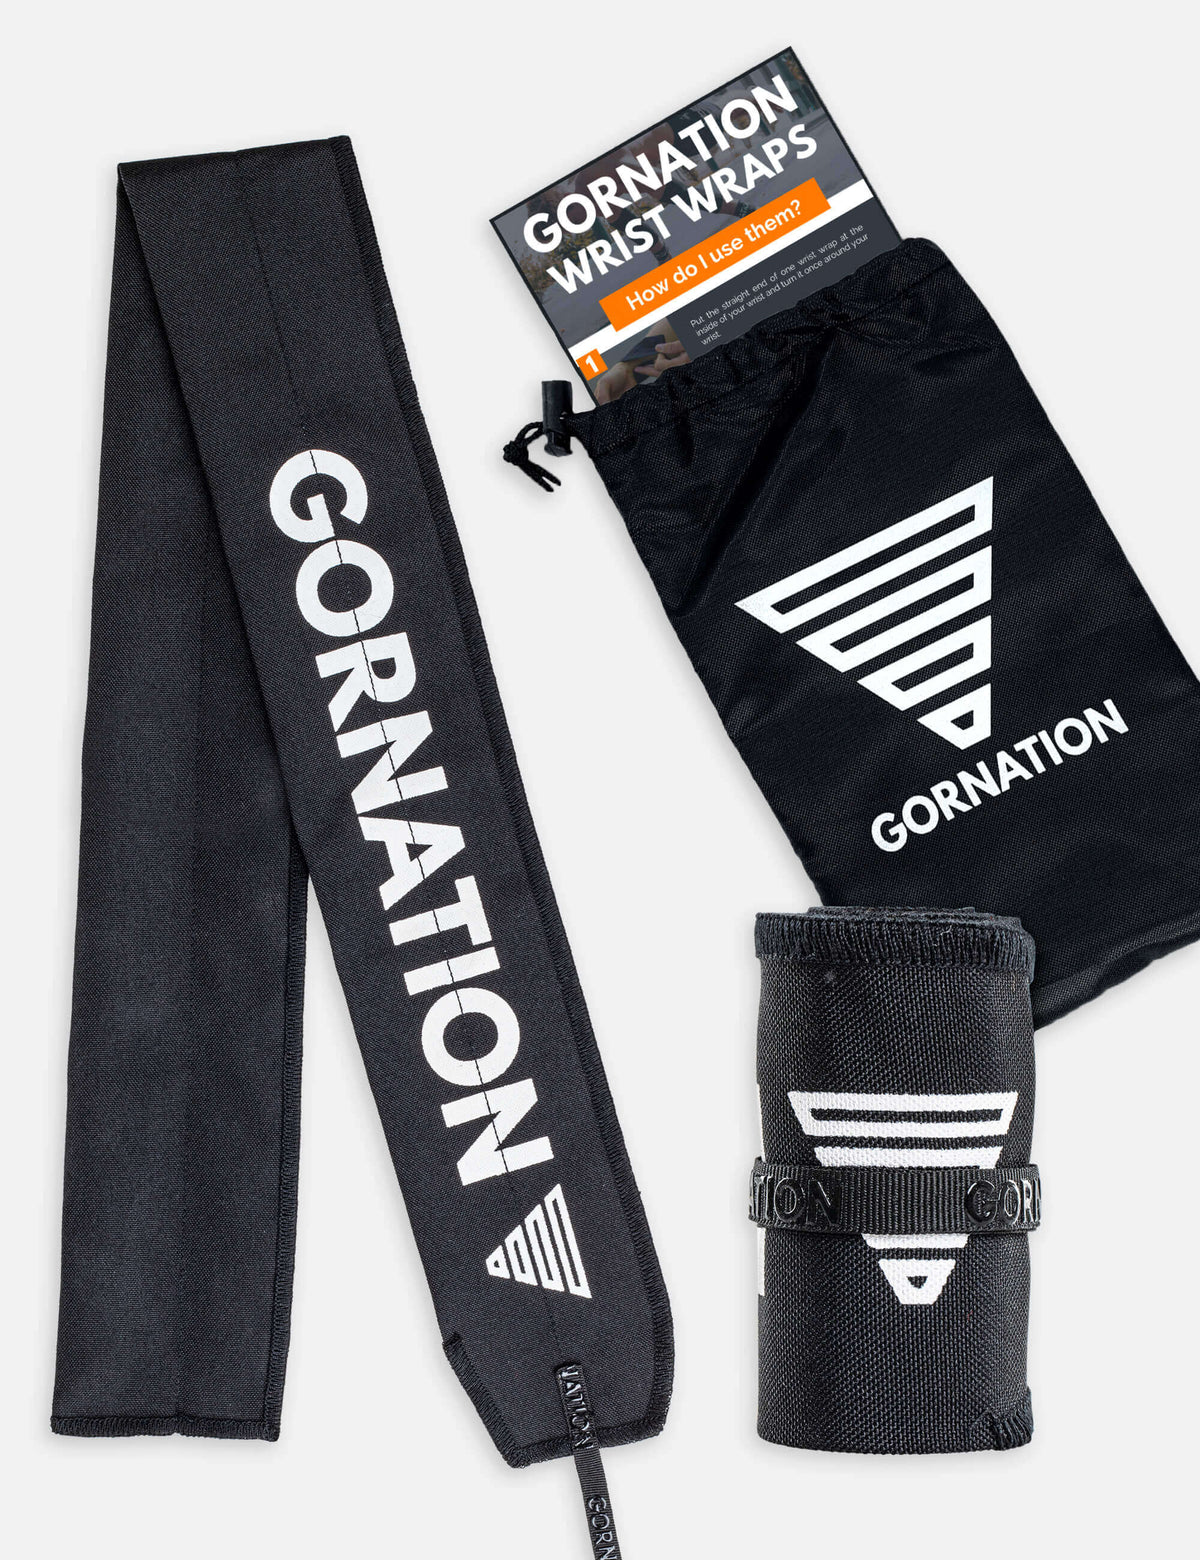 Black wrist wrap from Gornation for extra stability and injury prevention. And black cary bag.